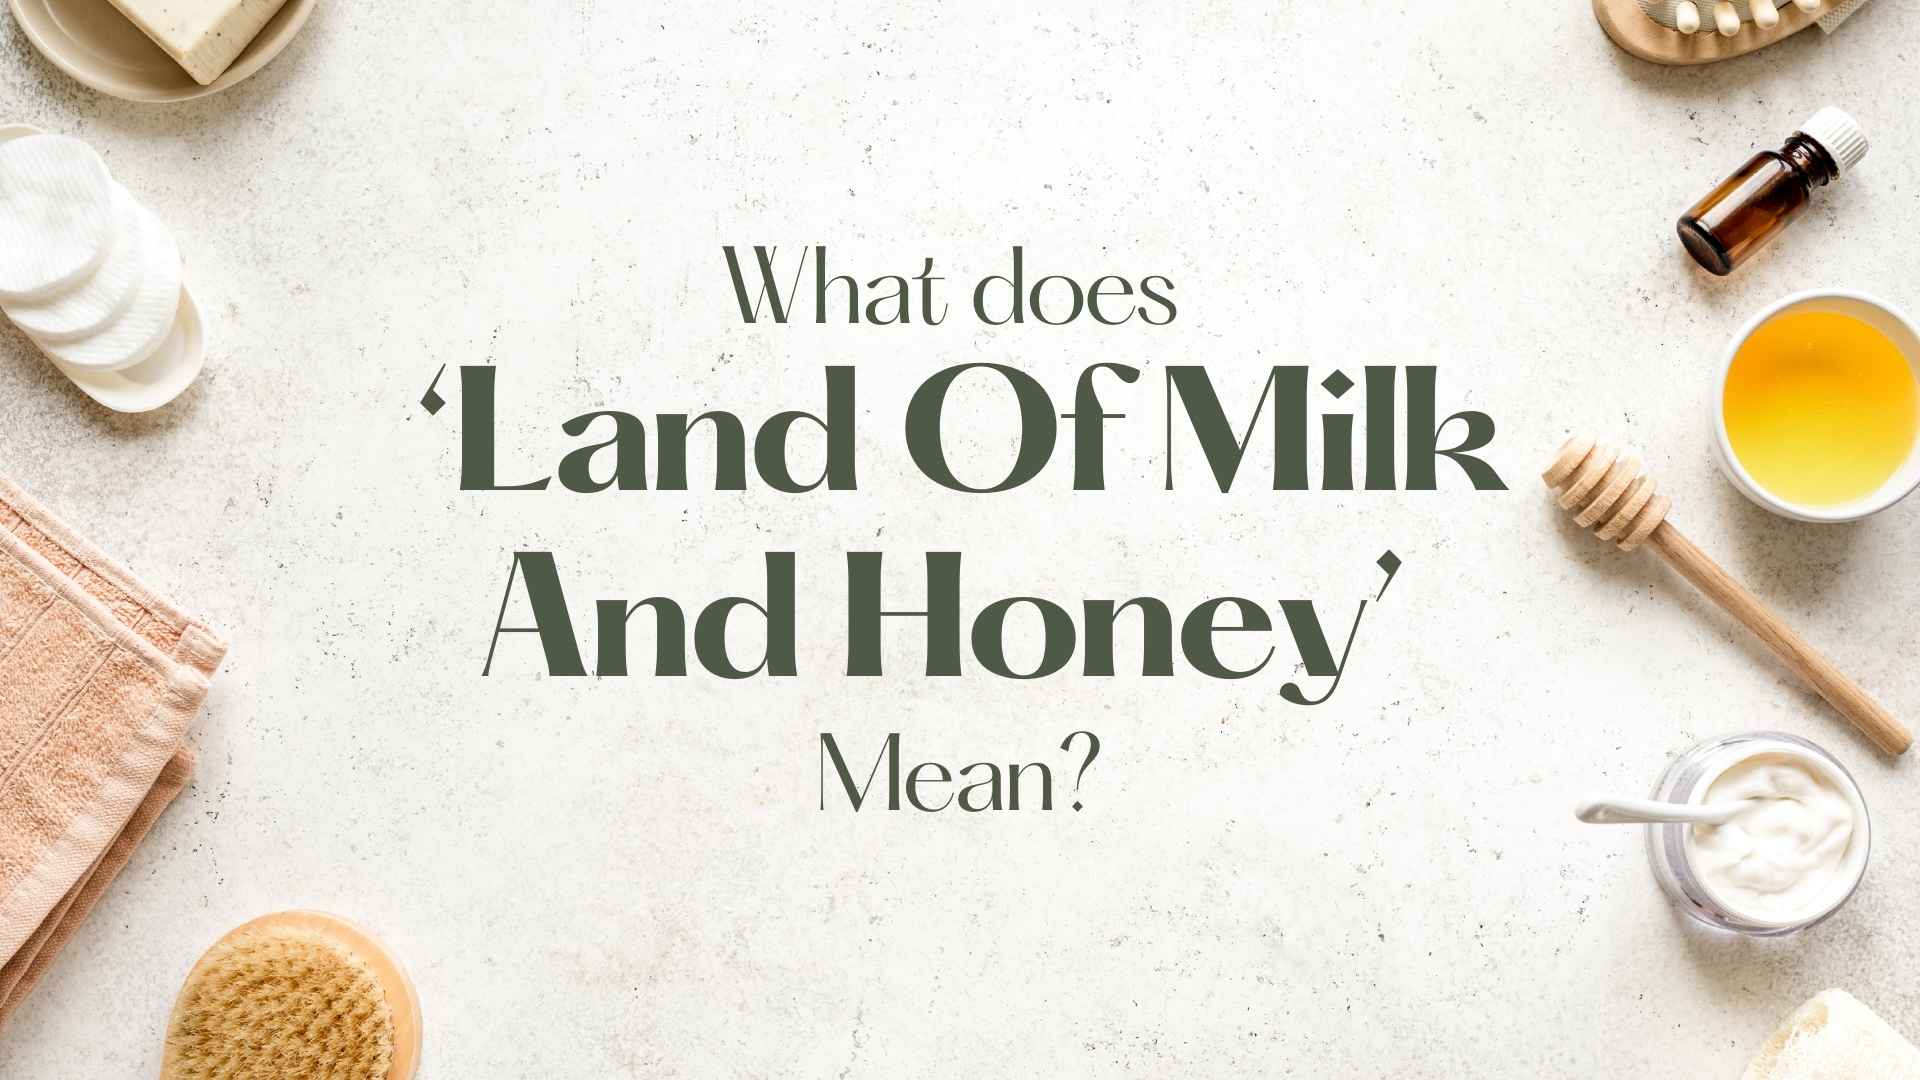 What Is ‘Milk And Honey’ Anyway?